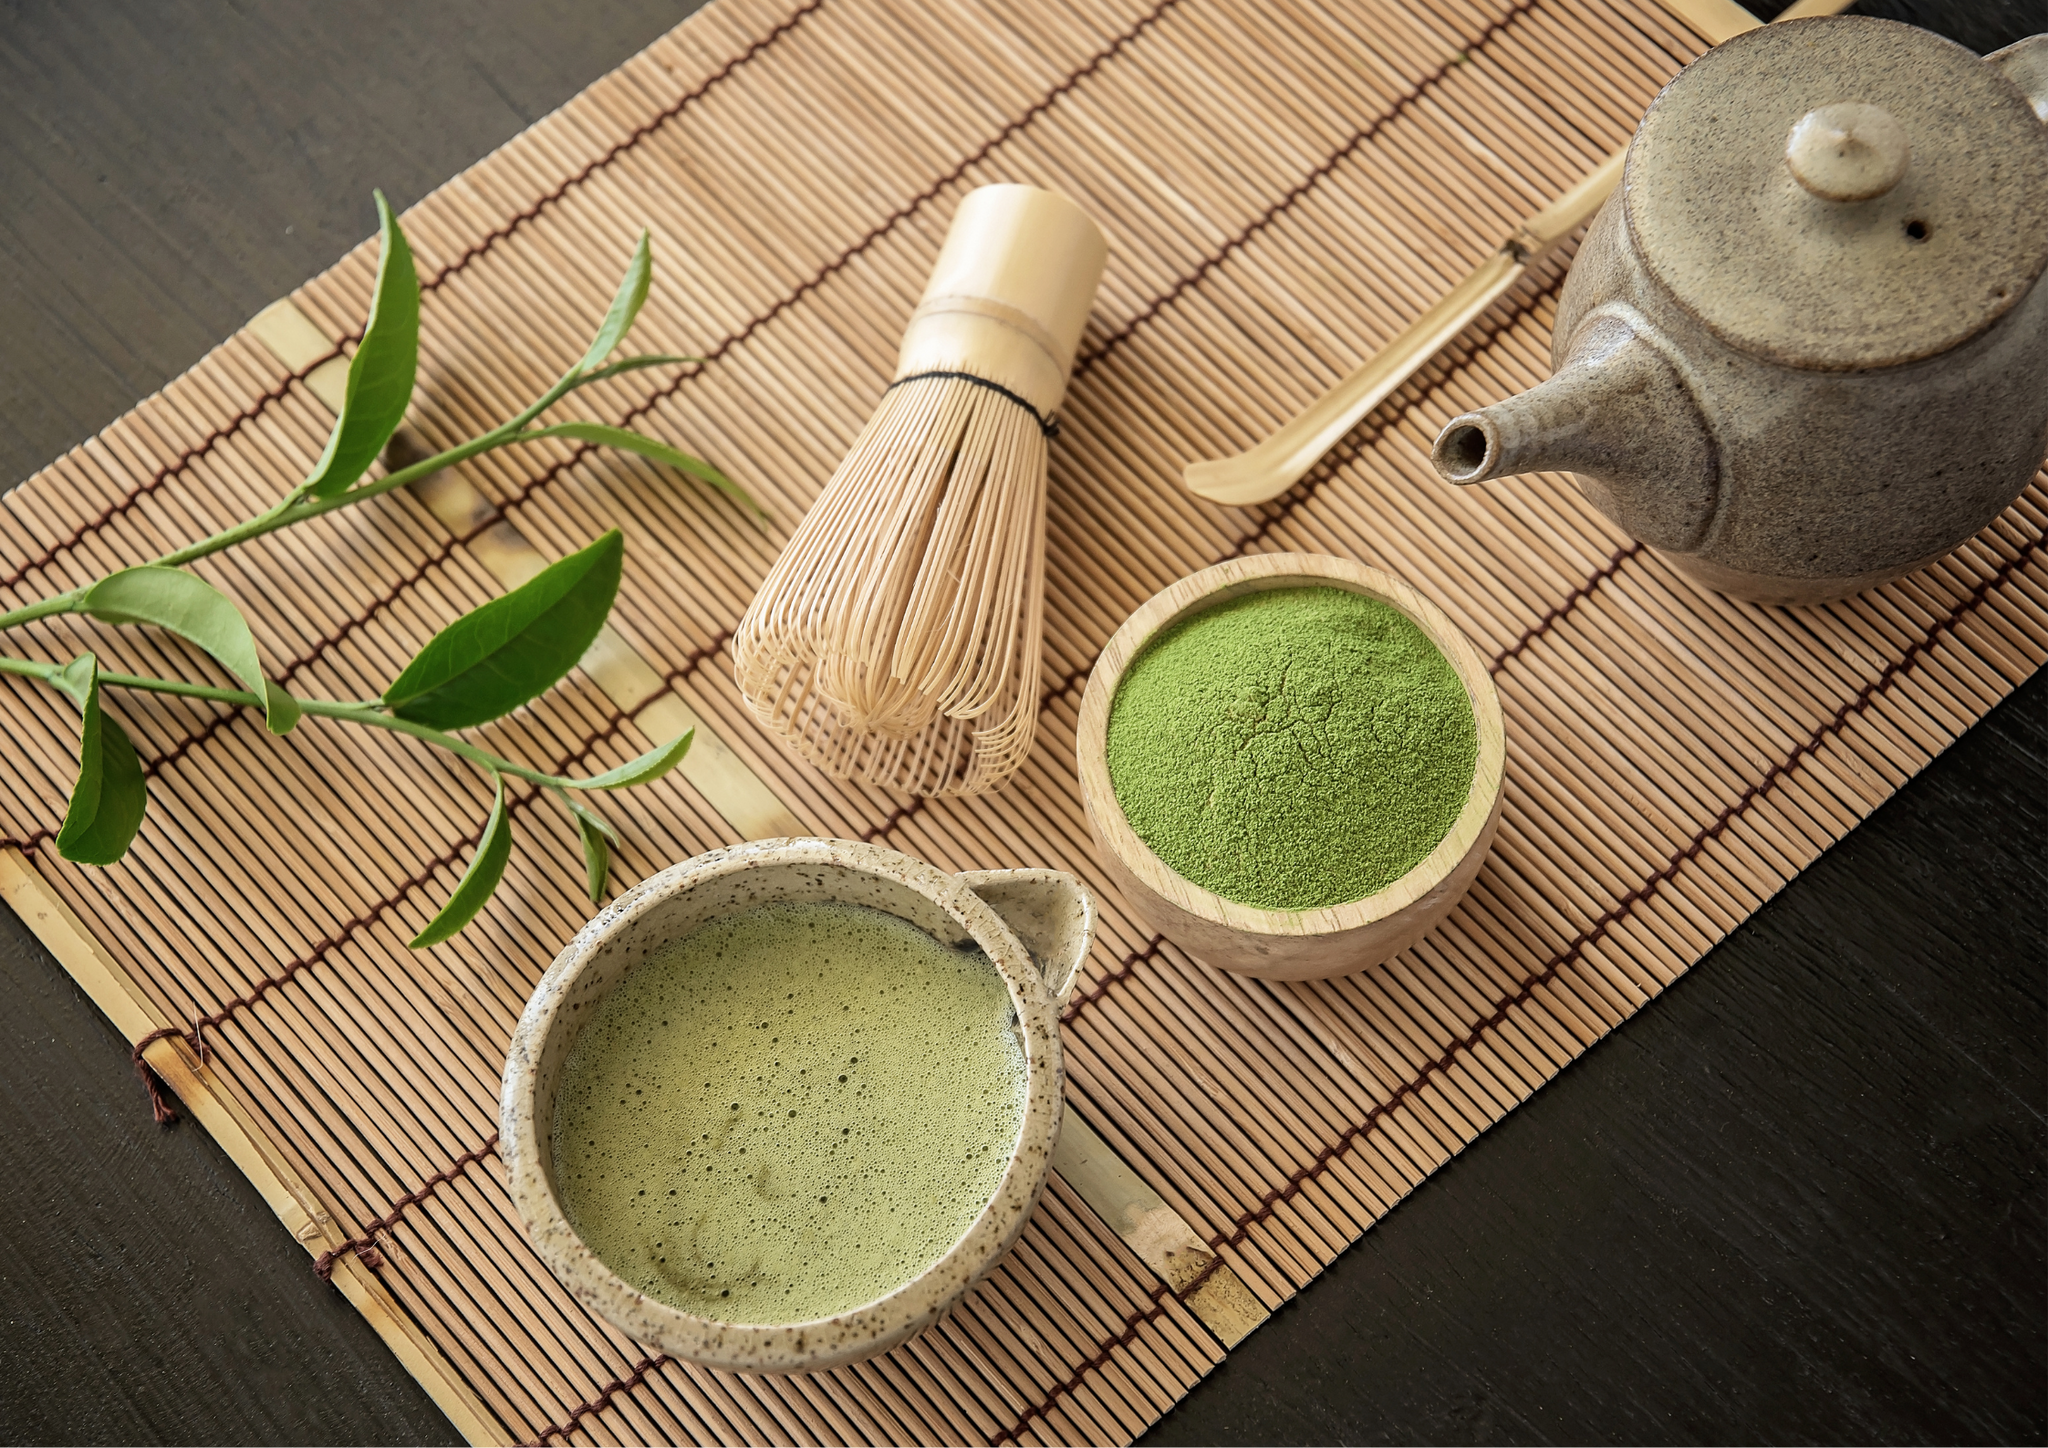 Aki Matcha Is The Most Authentic Japanese Matcha Brand For Green Tea Enthusiasts. Know Why!